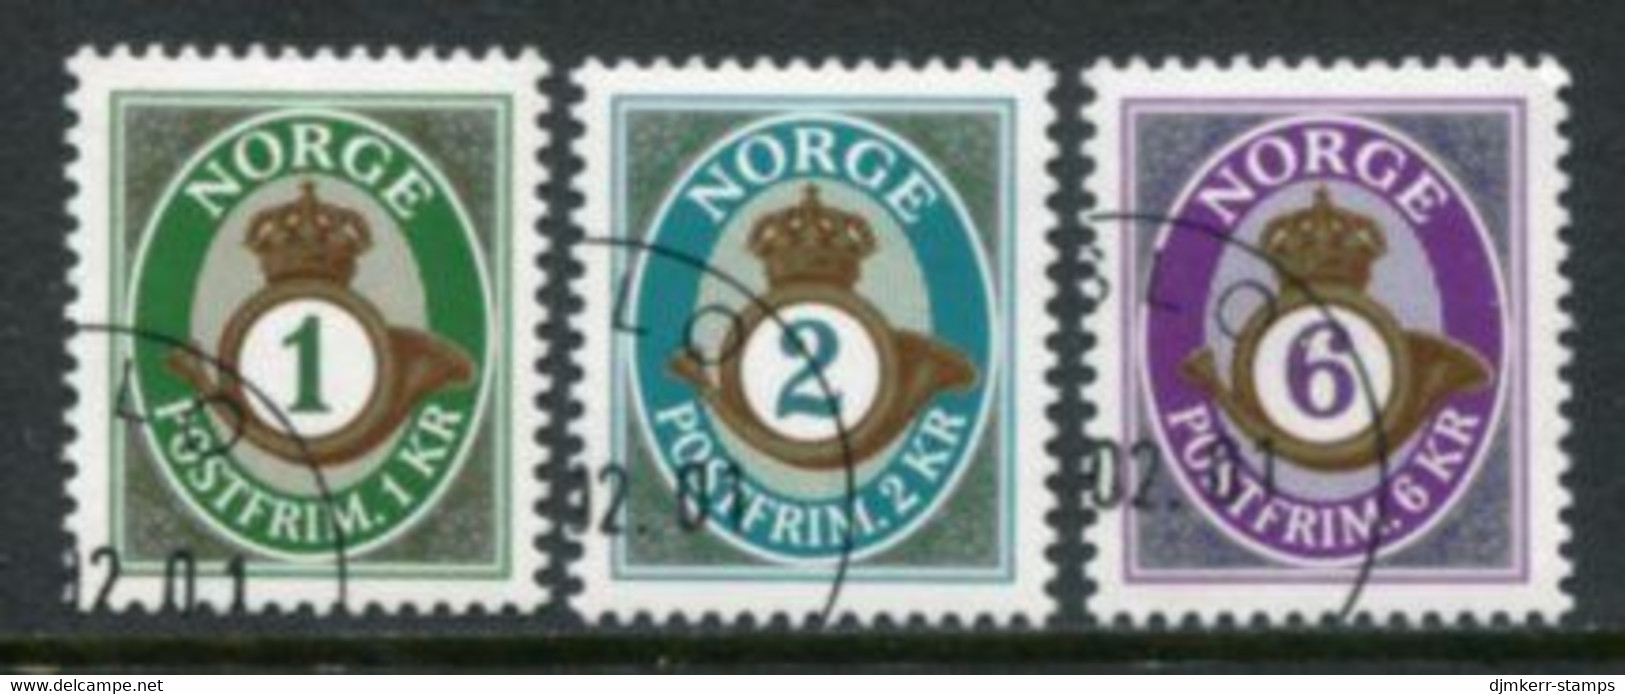 NORWAY 2001 Posthorn Definitive Used.  Michel 1380-82 - Used Stamps